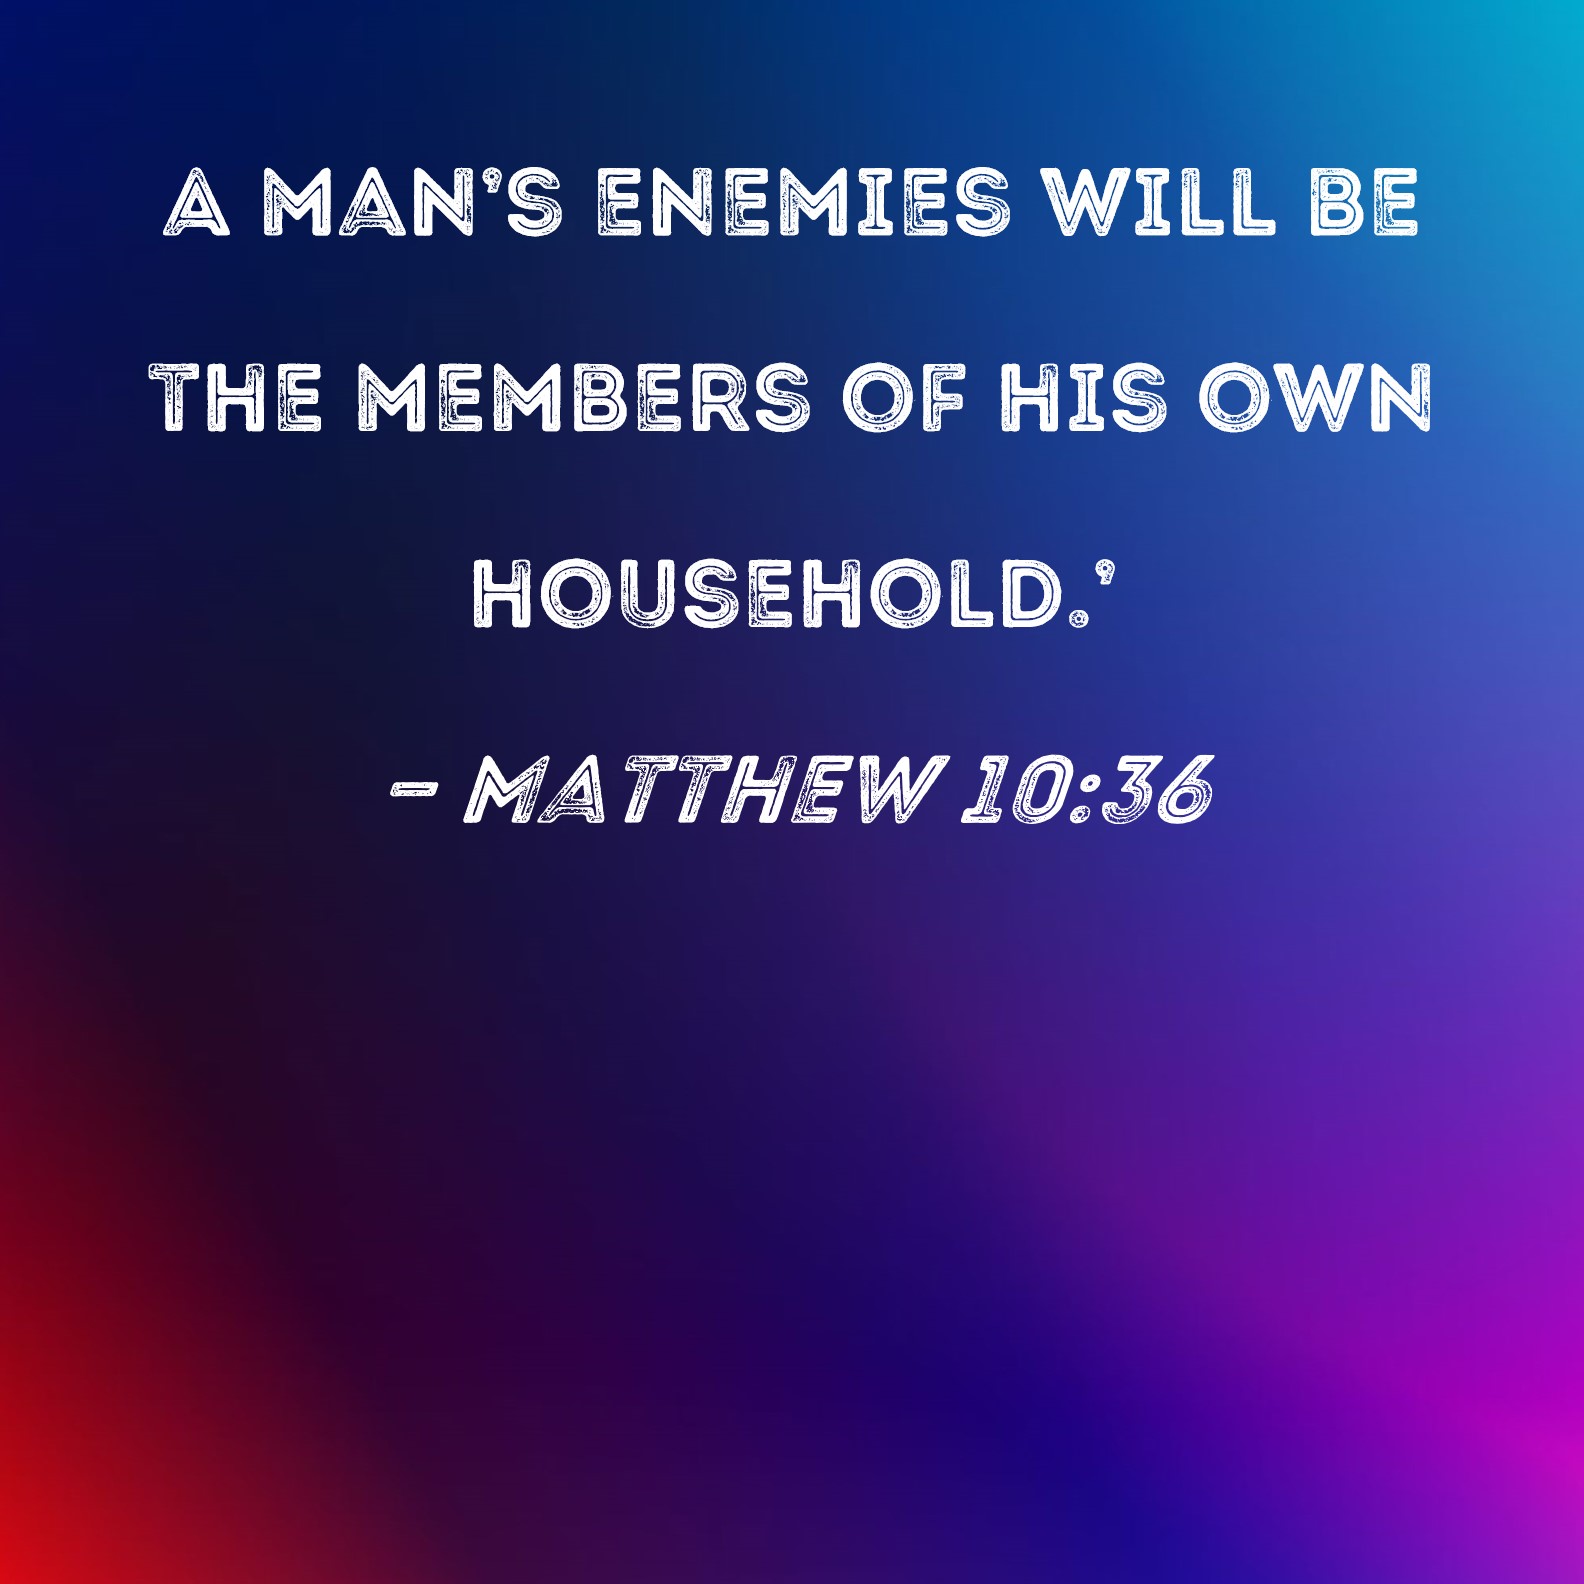 Matthew 10:36 A man's enemies will be the members of his own